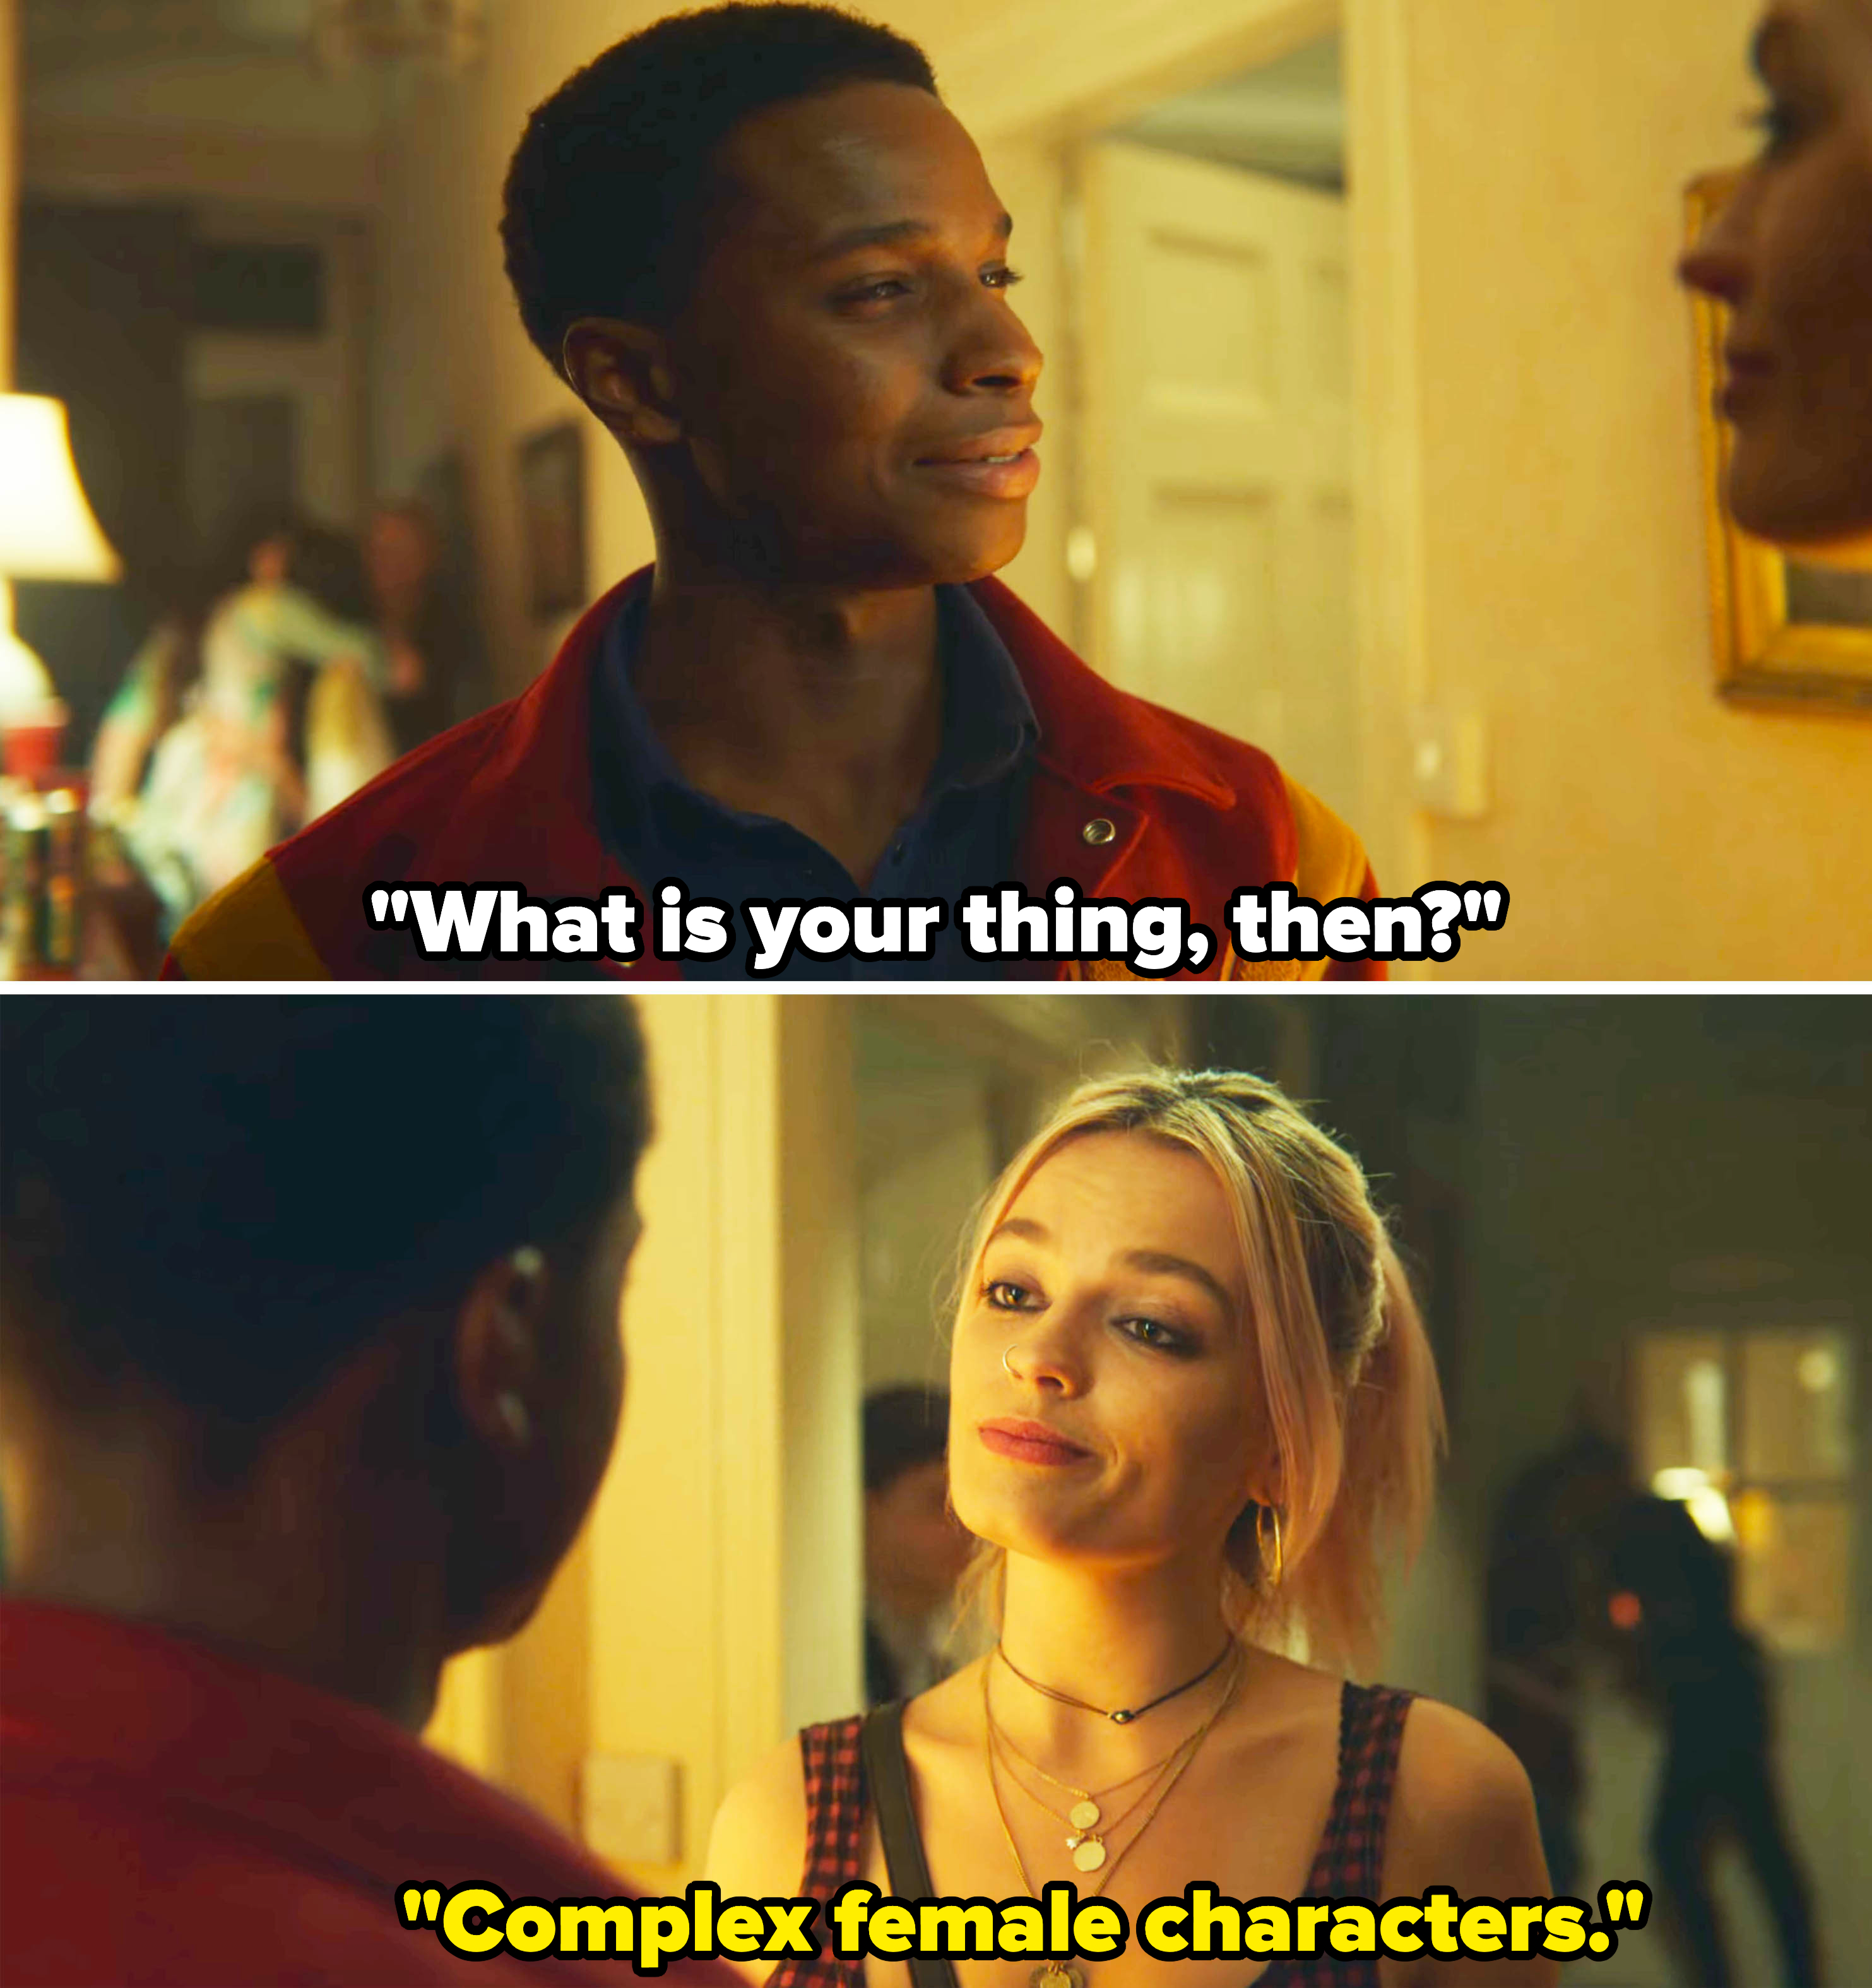 In &quot;Sex Education,&quot; Jackson asking Maeve what her thing is, and she says &quot;Complex female characters&quot;